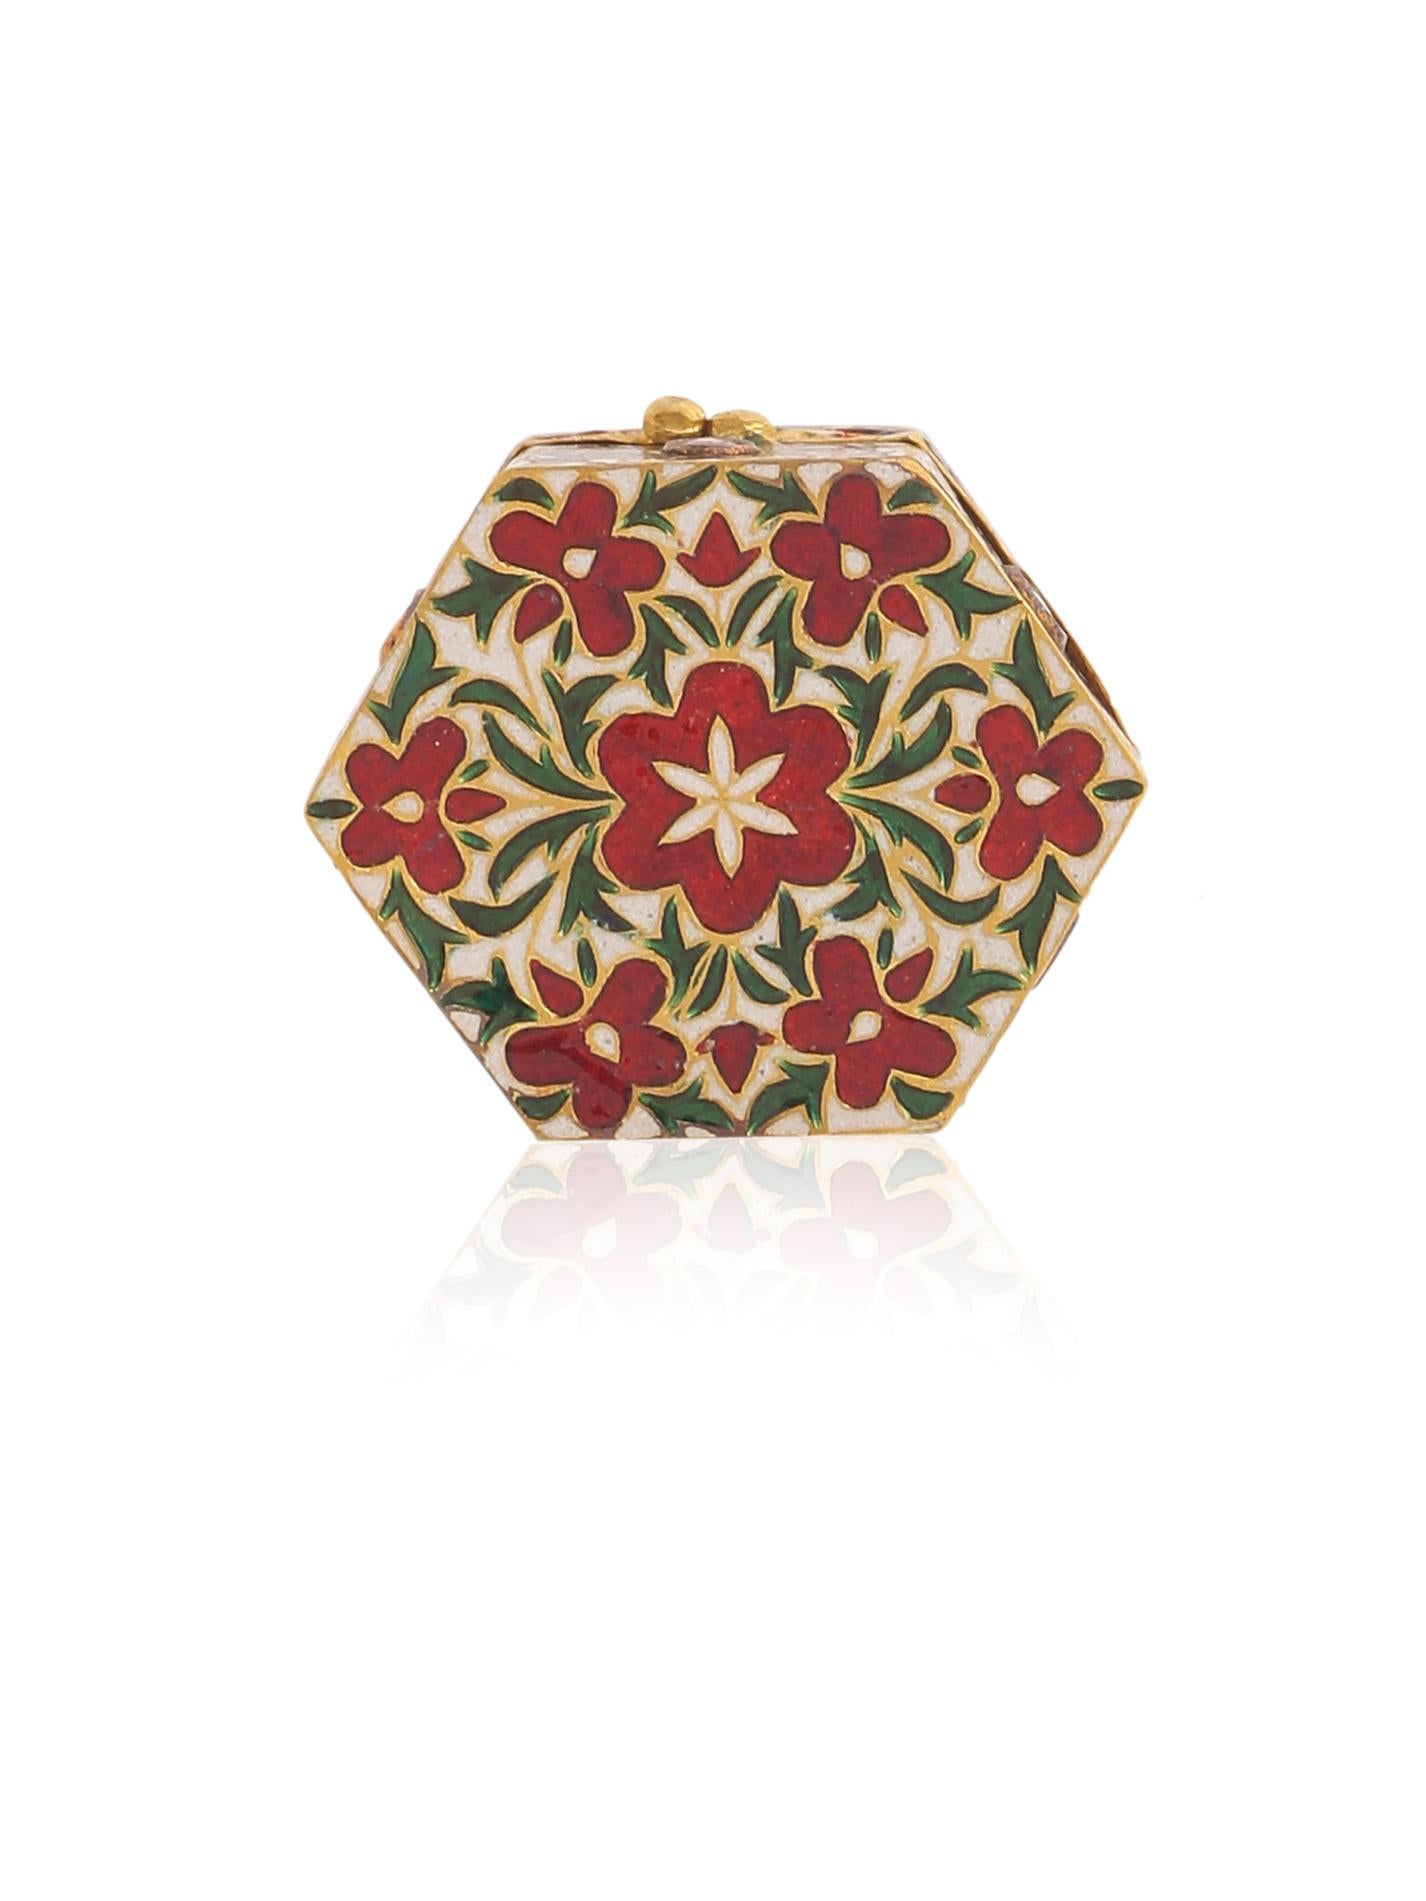 A beautiful box with fine enamel work studded with Diamonds and Rubies. Similar enamel work can be seen in Indian and Mughal jewellery from centuries ago. The work and art of enamelling is Called 